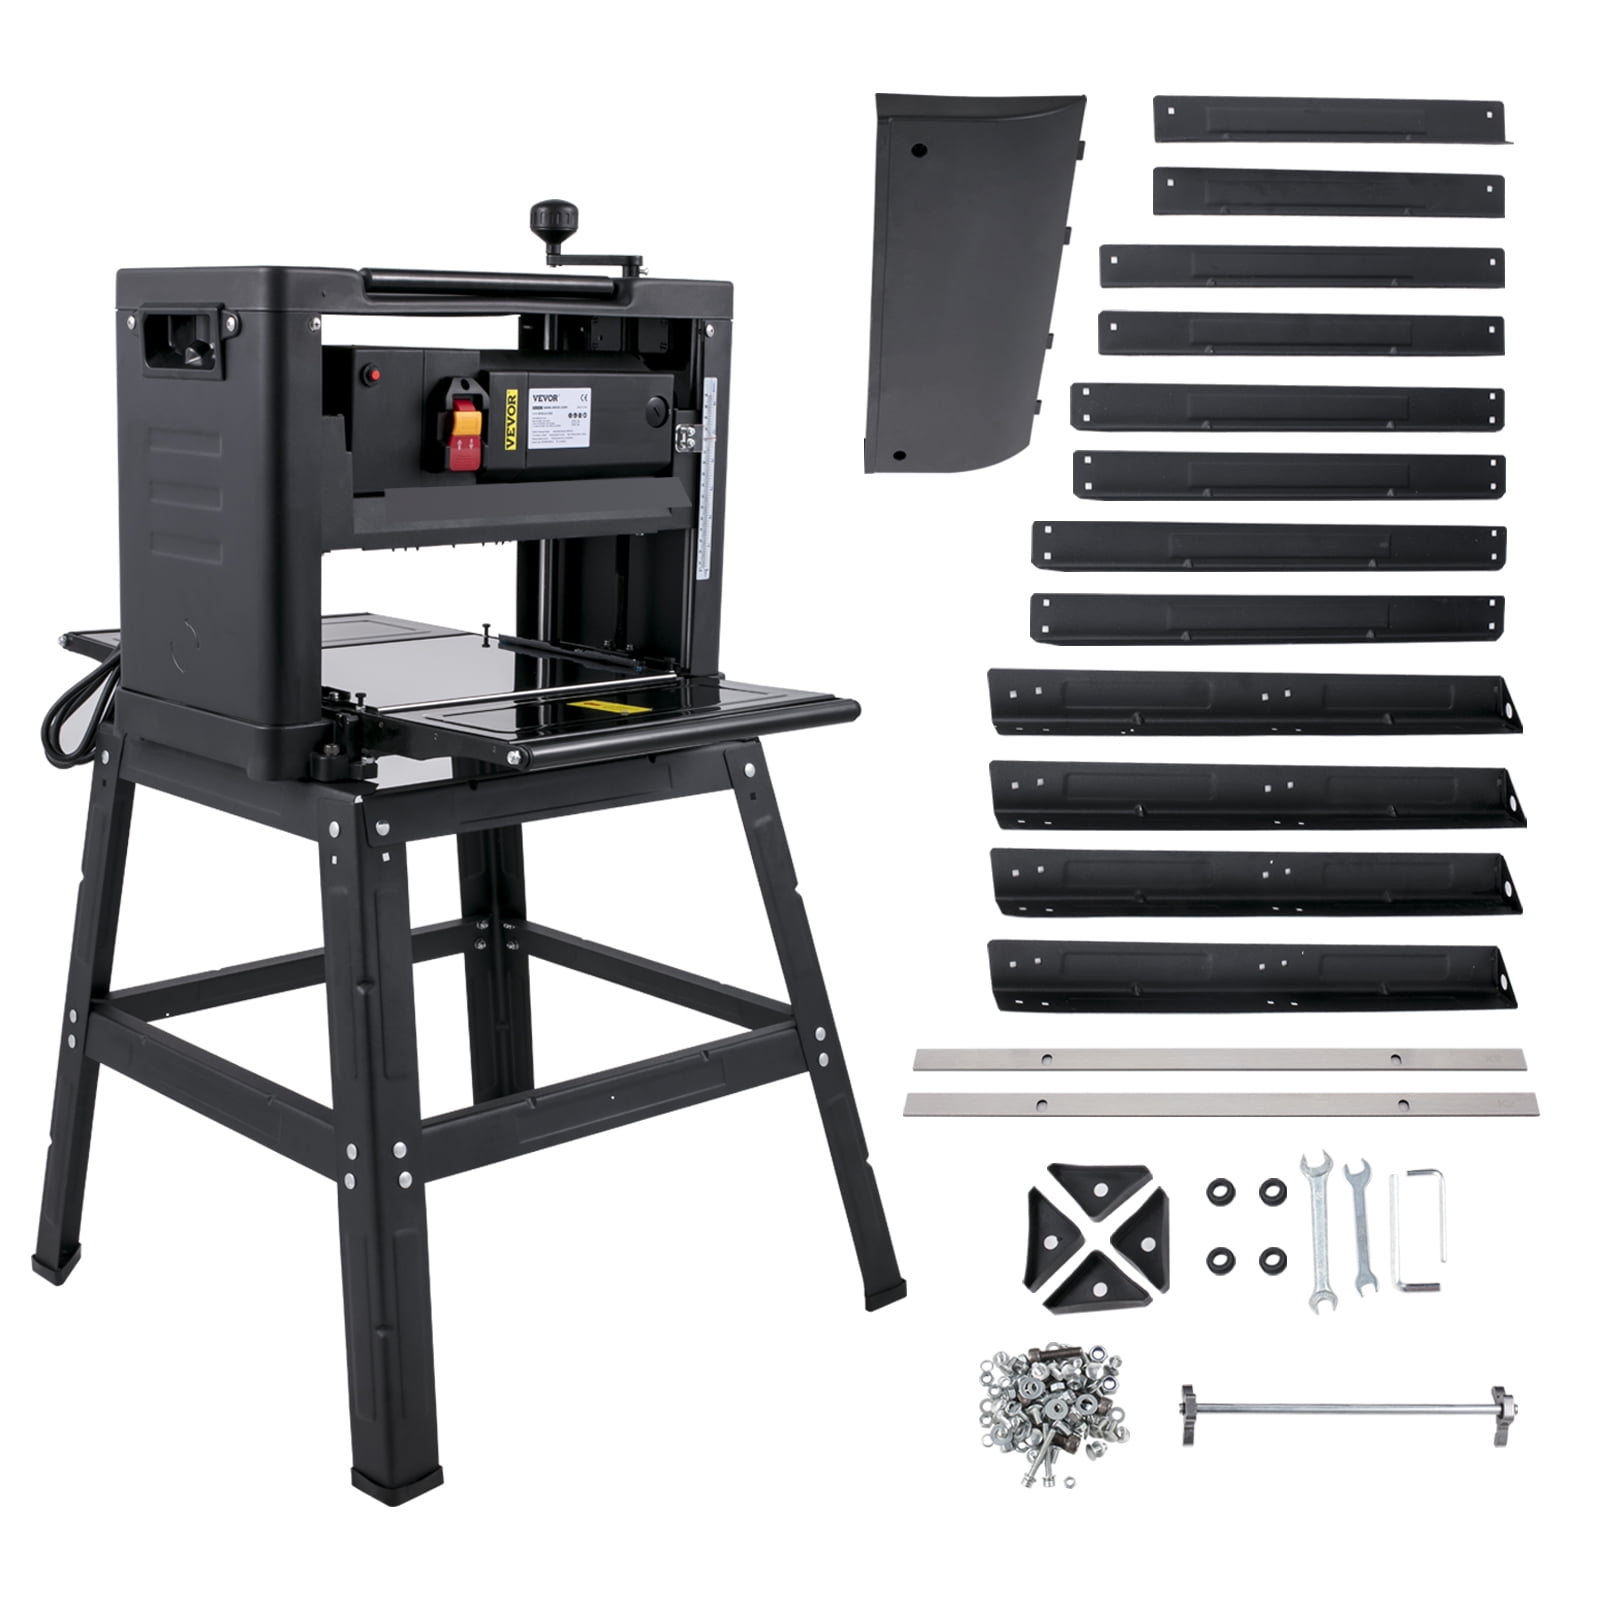 Planer KW712, Black+Decker - Planers and paint strippers